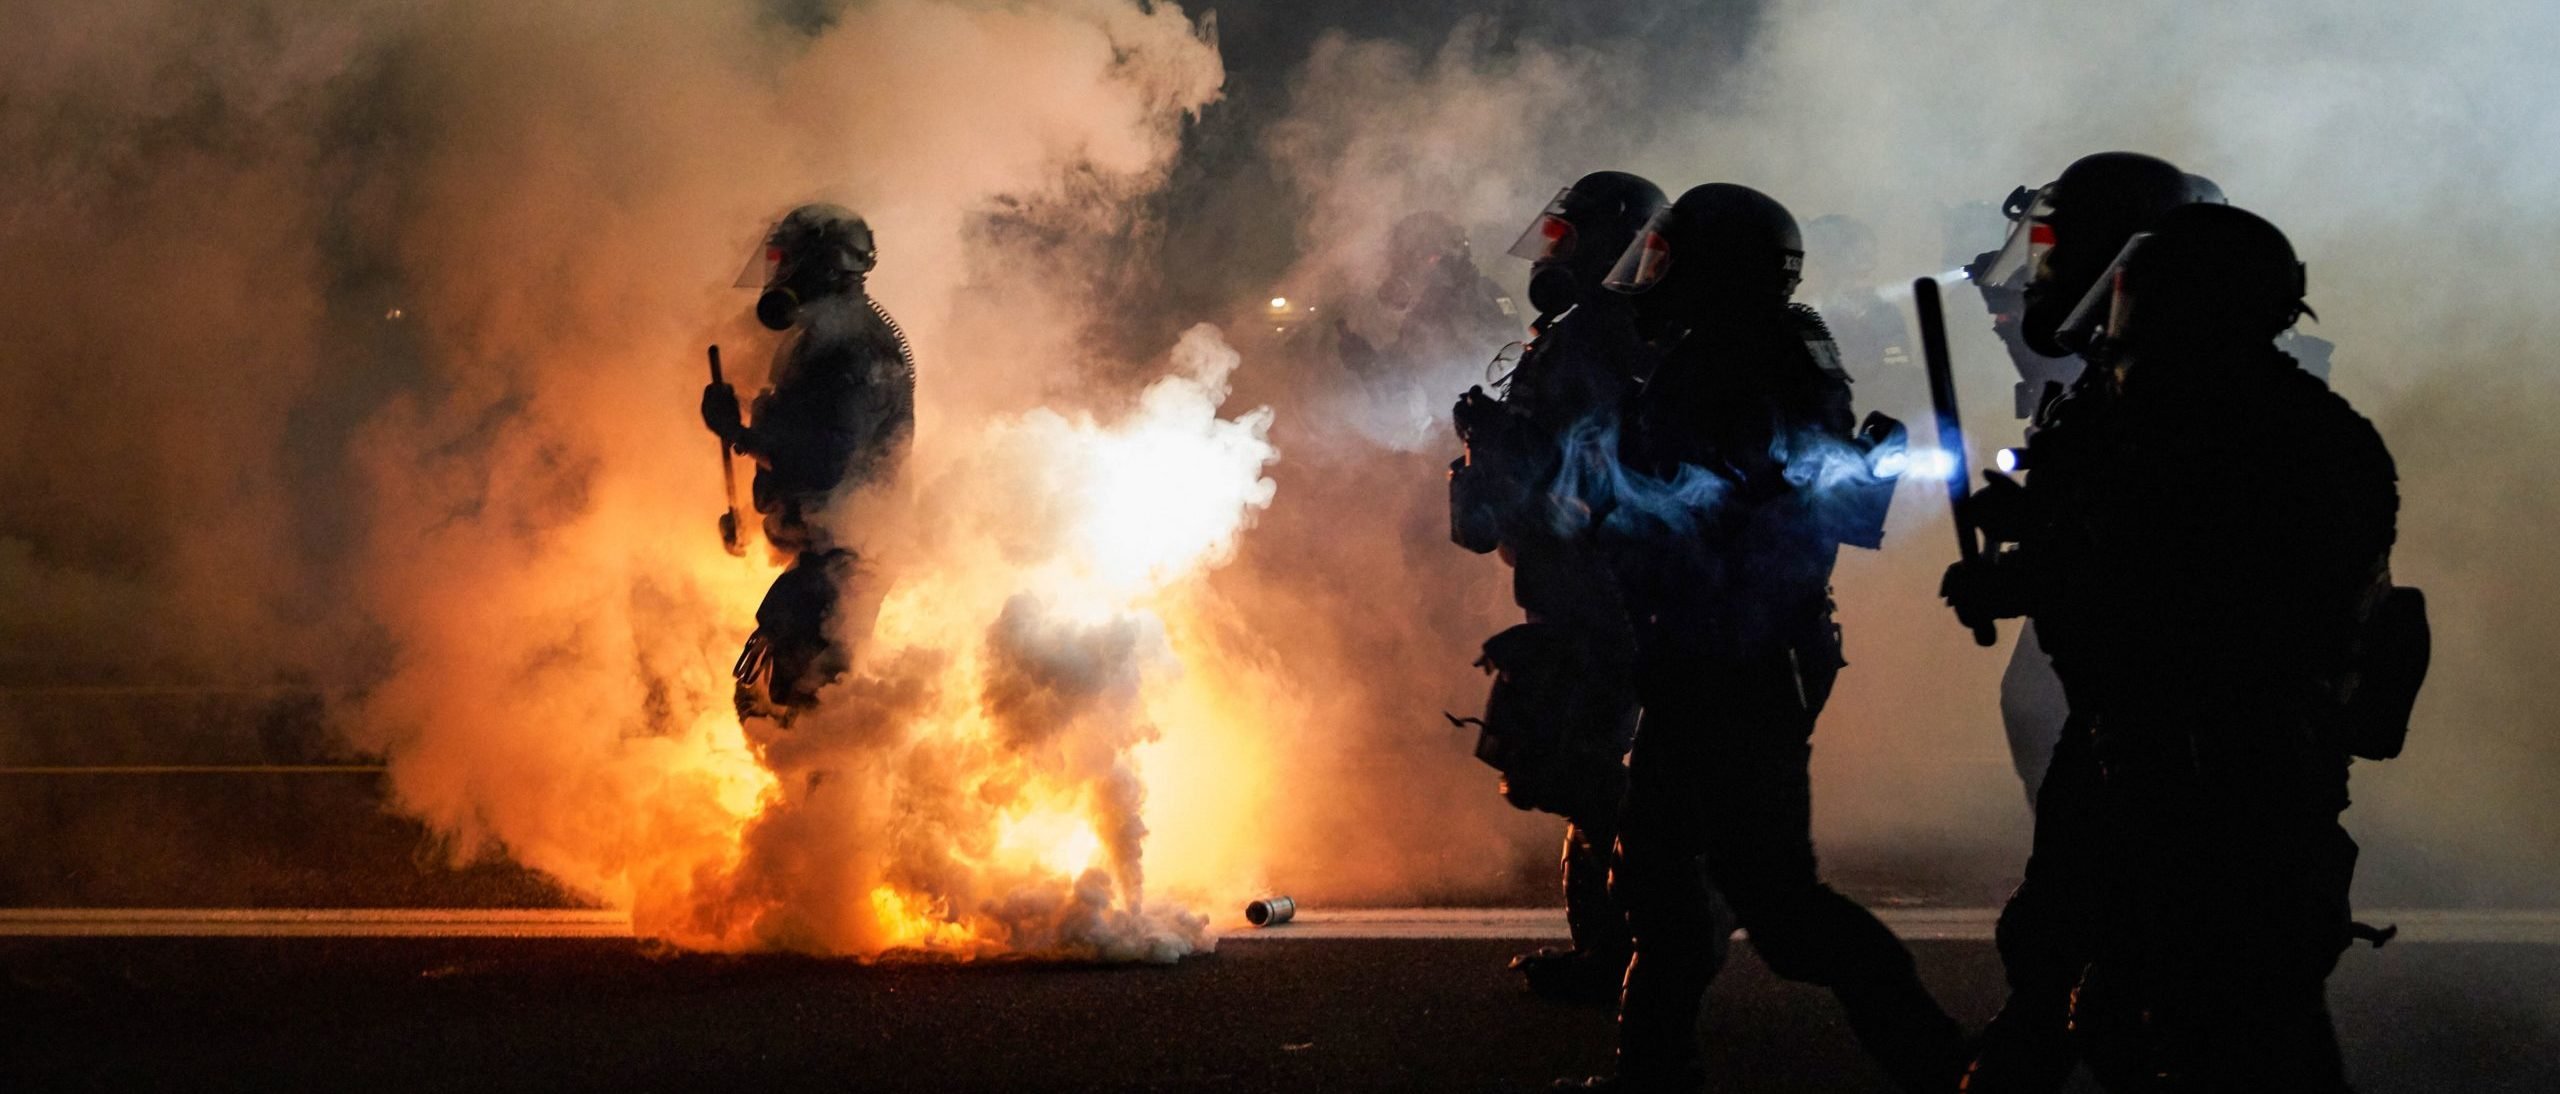 TOPSHOT - Oregon Police wearing anti-riot gear march towards protesters through tear gas smoke during the 100th day and night of protests against racism and police brutality in Portland, Oregon, on September 5, 2020. - Police arrested dozens of people and used tear gas against hundreds of demonstrators in Portland late on September 5 as the western US city marked 100 days since Black Lives Matter protests erupted against racism and police brutality. Protests in major US cities erupted after the death of African American George Floyd in May 2020 at the hands of a white police officer in Minneapolis. (ALLISON DINNER/AFP via Getty Images)